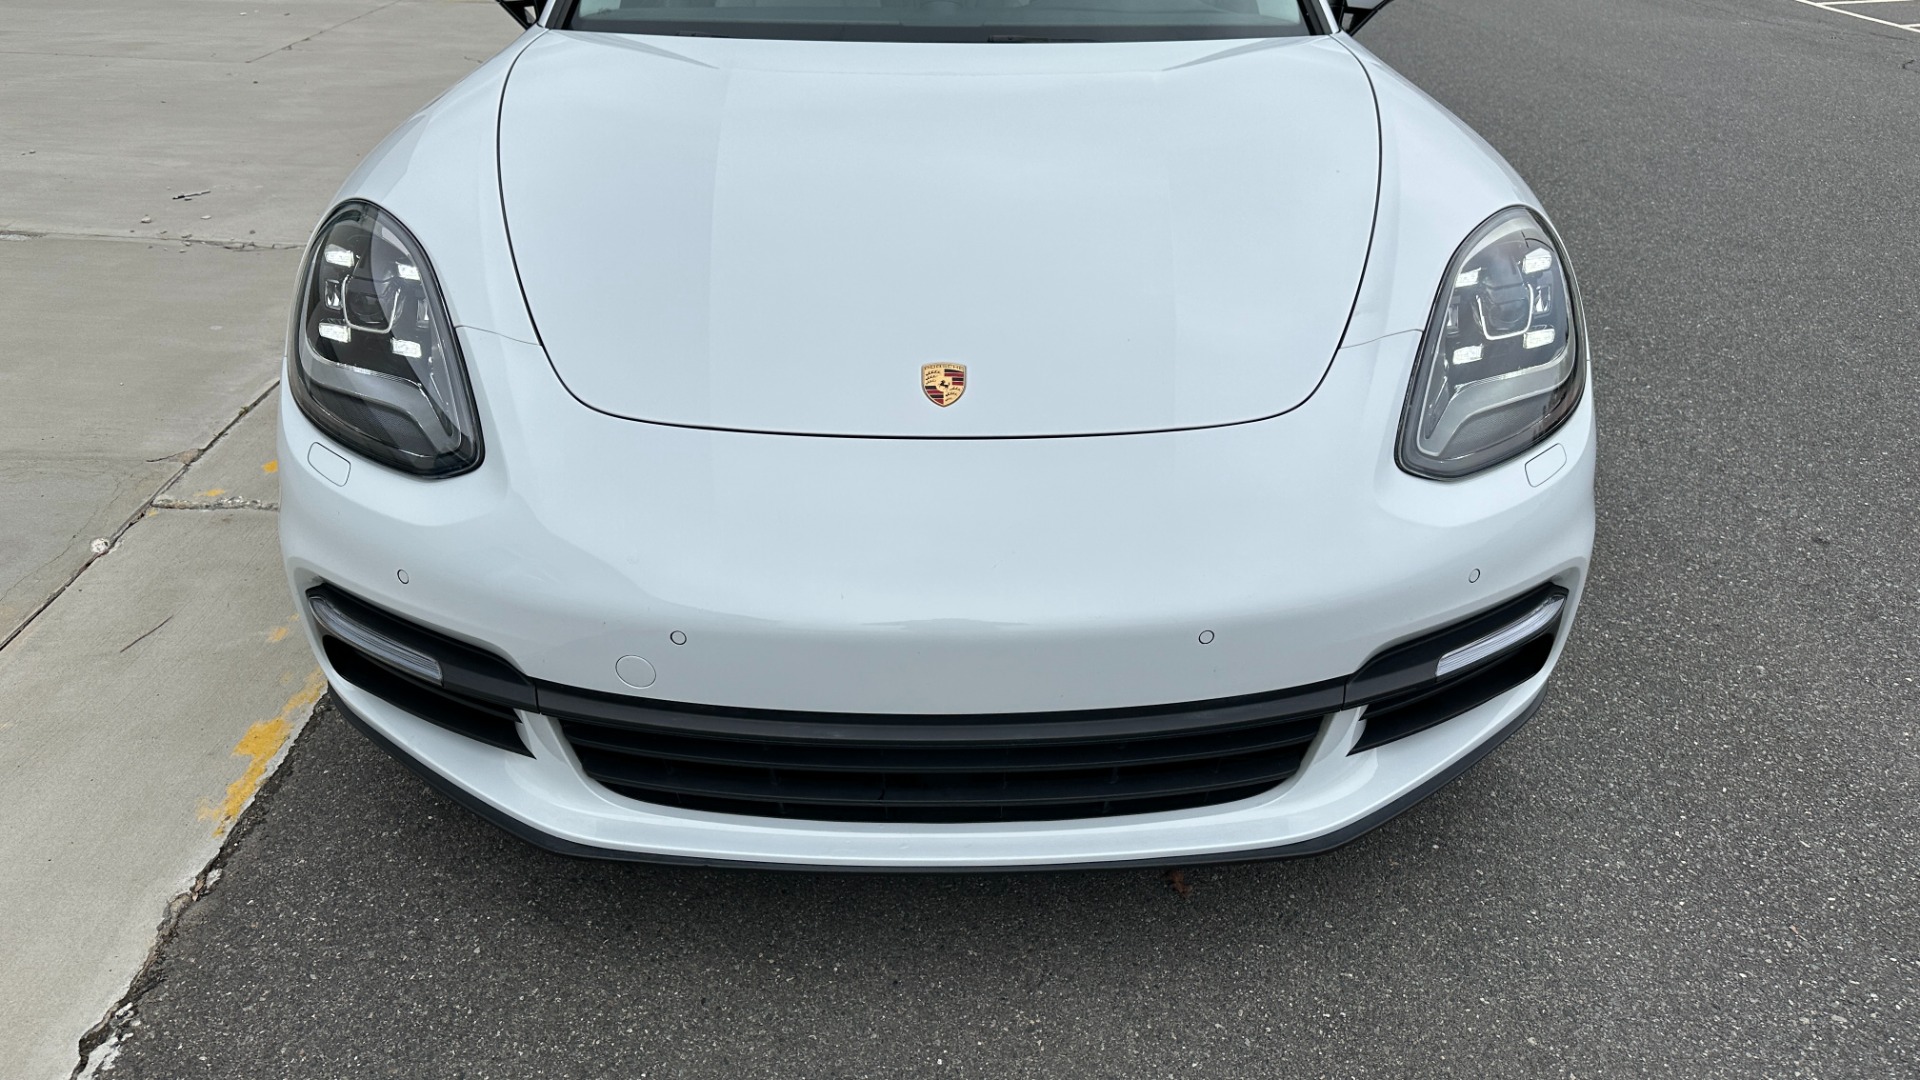 Used 2017 Porsche PANAMERA 4S / AWD / 2.9L TURBO / PREMIUM / SPORT CHRONO / BOSE / REARVIEW for sale $81,000 at Formula Imports in Charlotte NC 28227 10